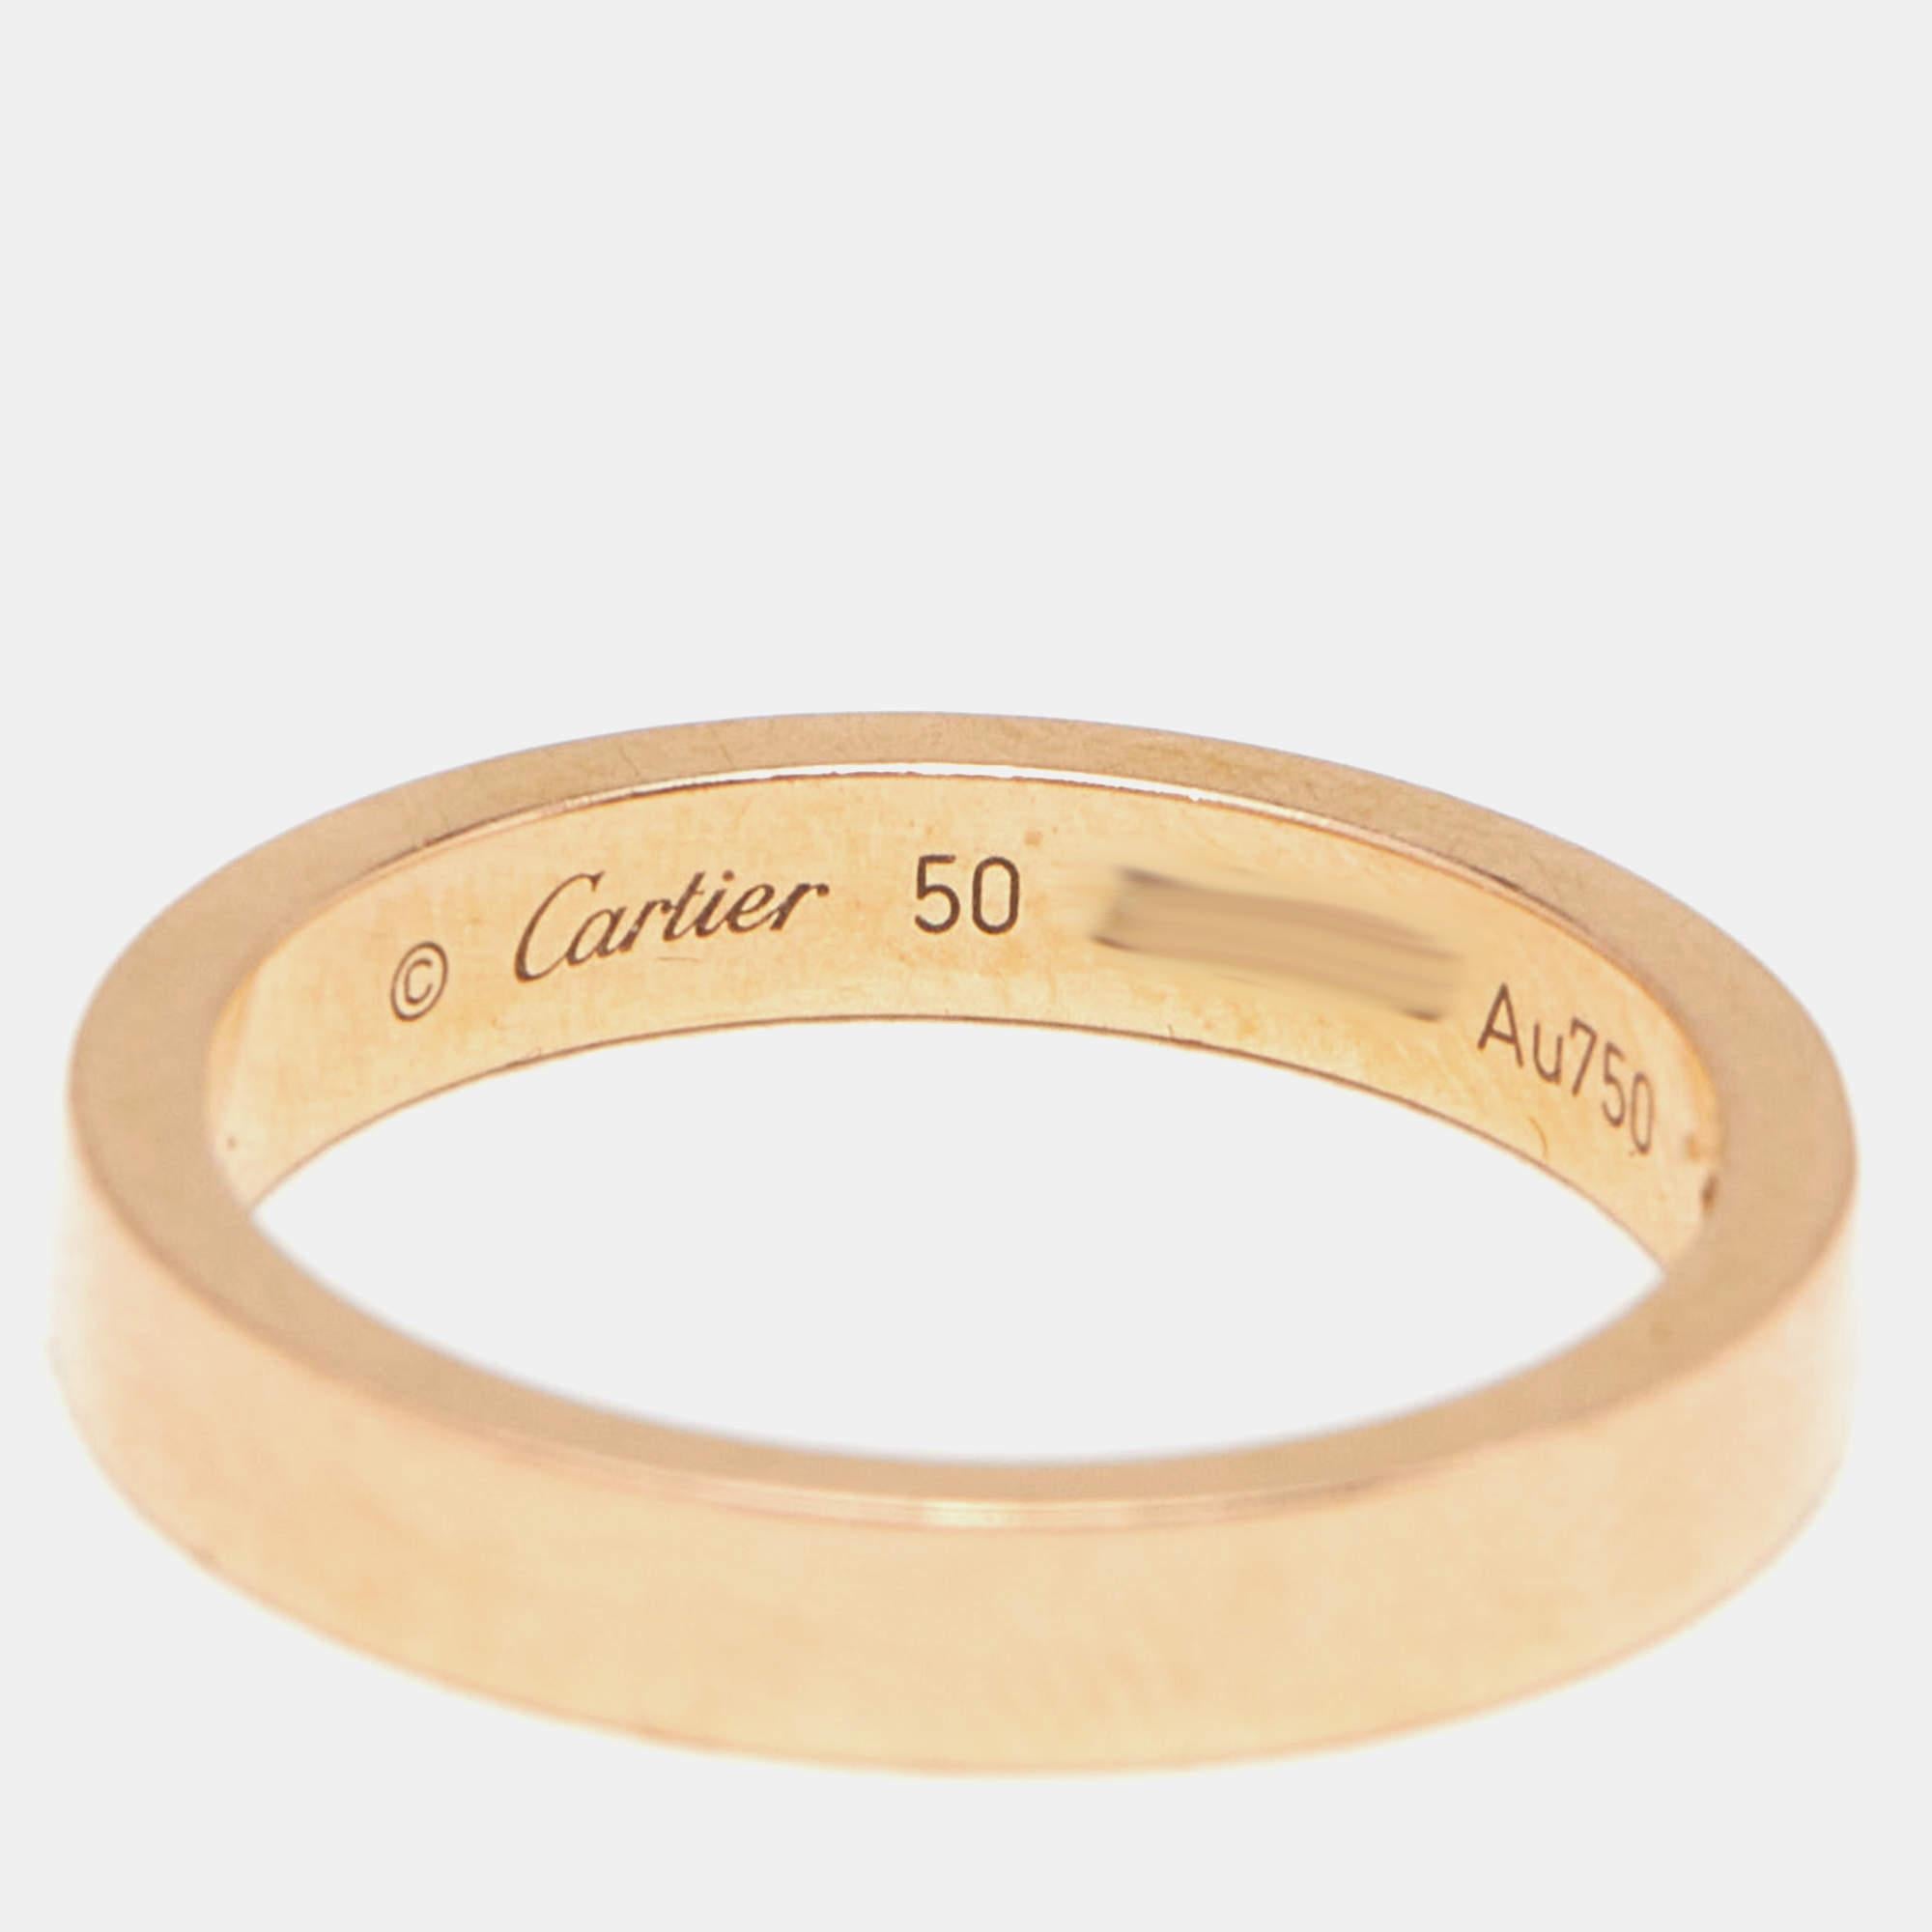 Let this C de Cartier band ring be a favored choice when it comes to choosing a ring for daily wear. The ring is made from 18k rose gold and is highlighted by brand engravings and a single diamond. It will be a prized accessory you will love wearing